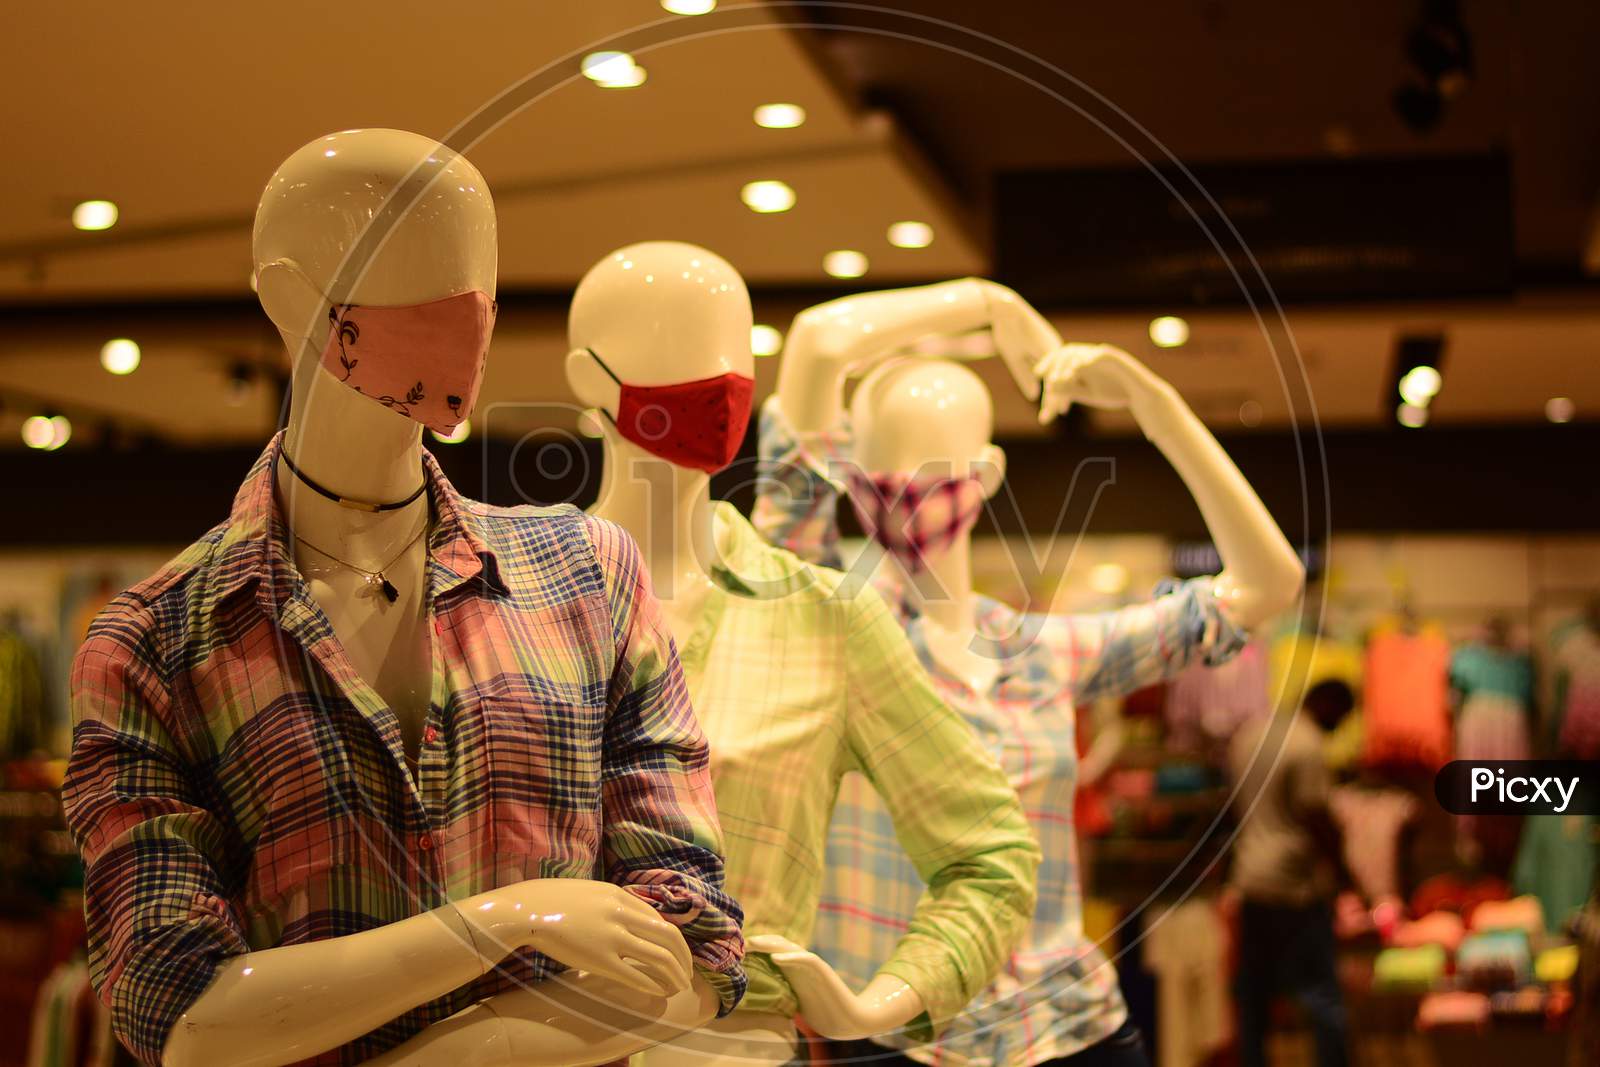 Three Masks Along With Fashion Garments Are Displayed Non Three Mannequins In A Garment Store